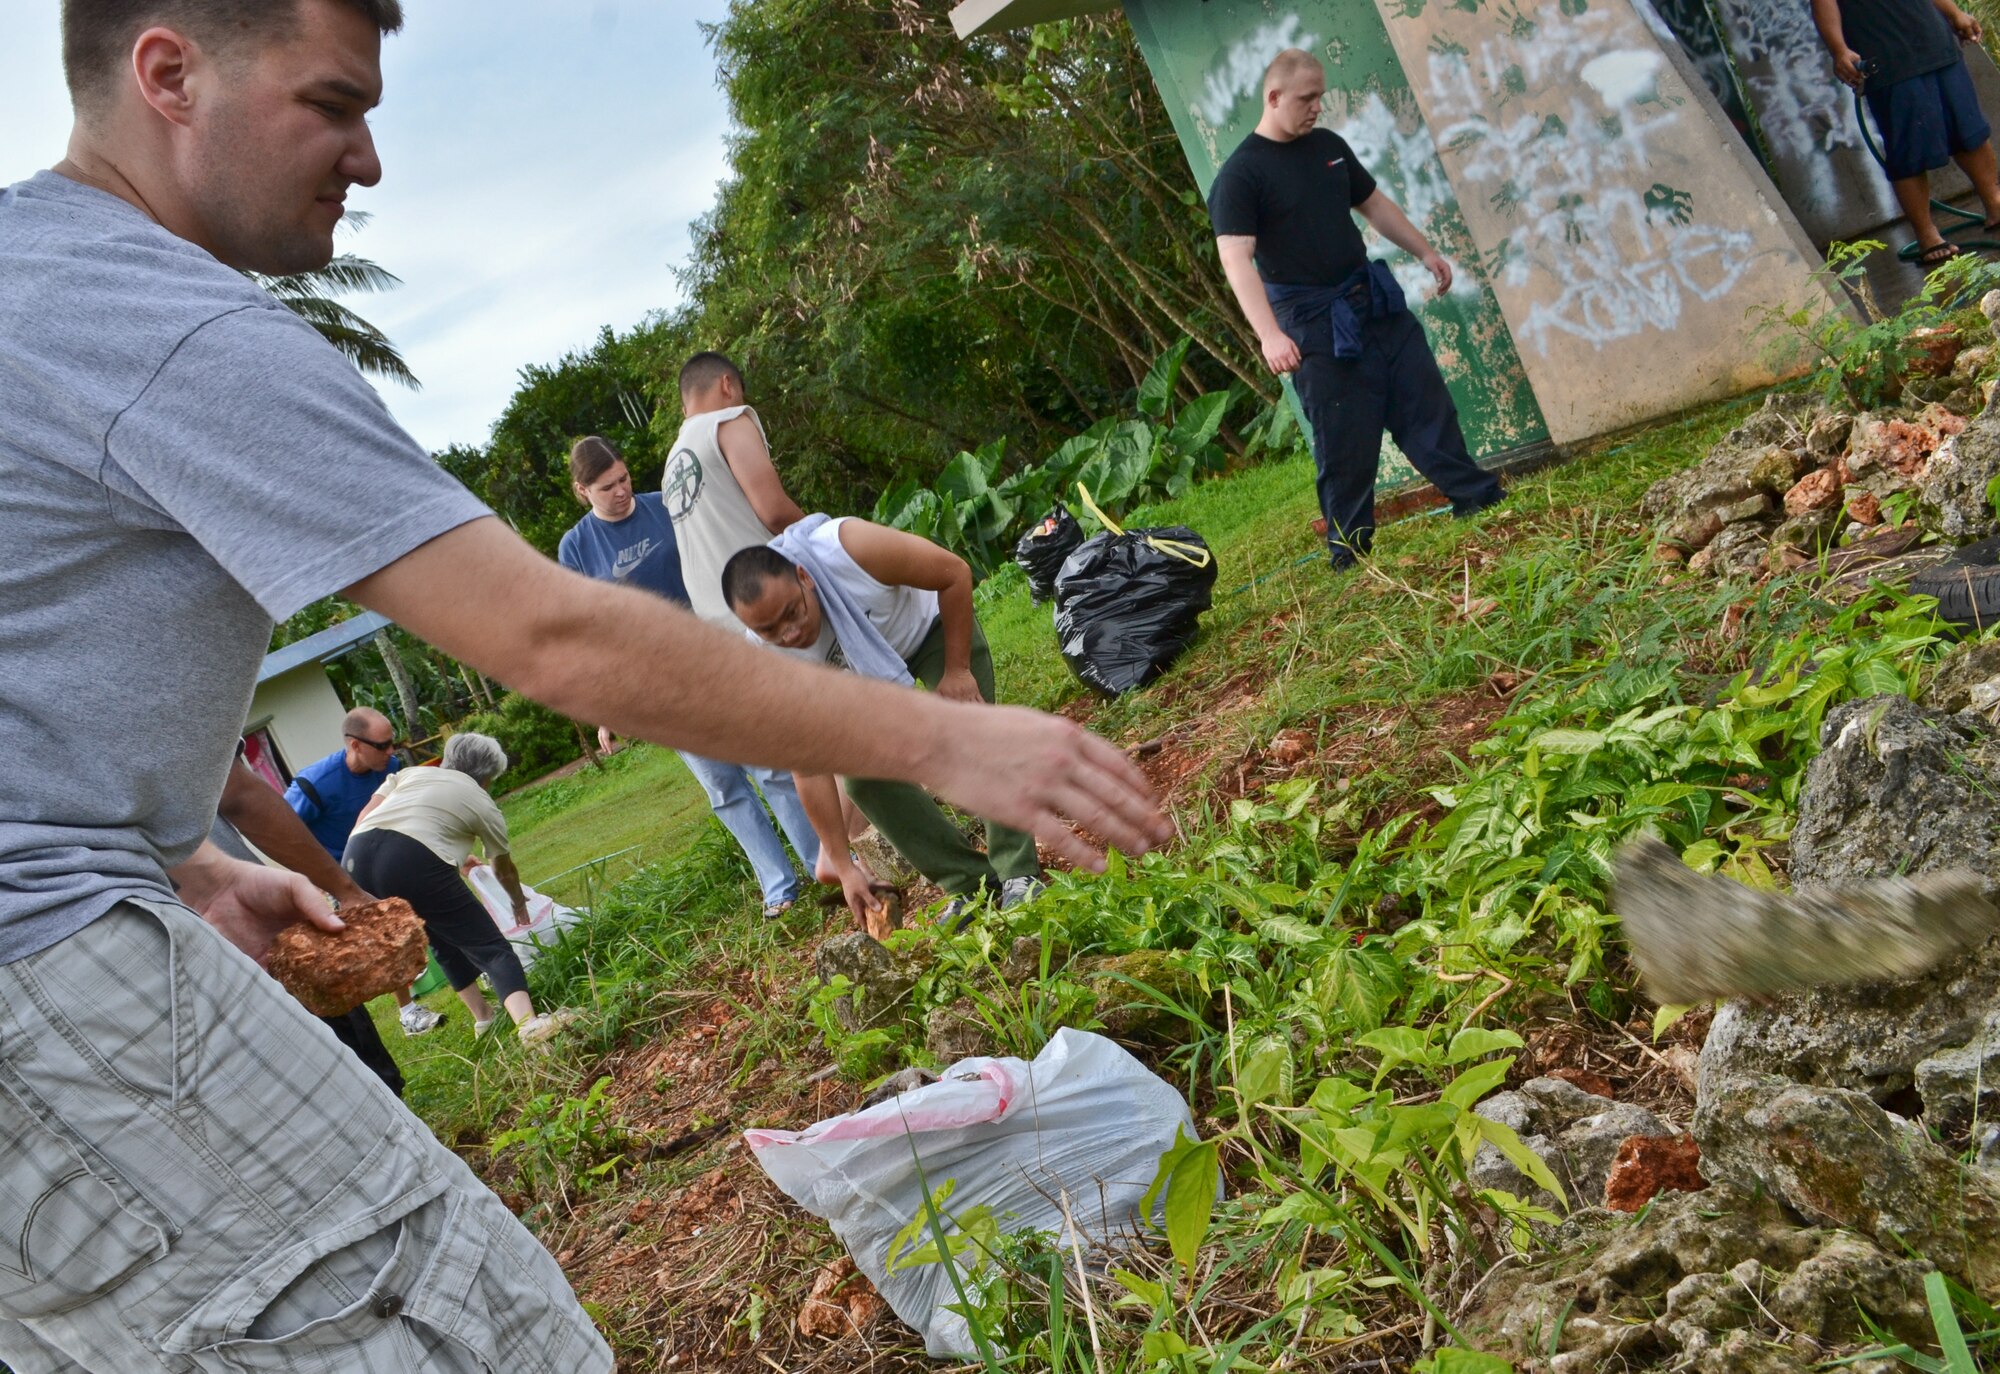 Airmen from the 36th Maintenance Squadron, 36th Wing chapel and their families pick up debris and trash prior to painting a bus stop for an Island Beautification project in Mangilao, Guam Oct 15.  Throughout the year, squadrons from Andersen AFB volunteer their time to help clean, repair and build areas in Guam communities in support of the Islandwide Beautification Task Force. (U.S. Air Force photo by Staff Sgt. Alexandre Montes/RELEASED) 